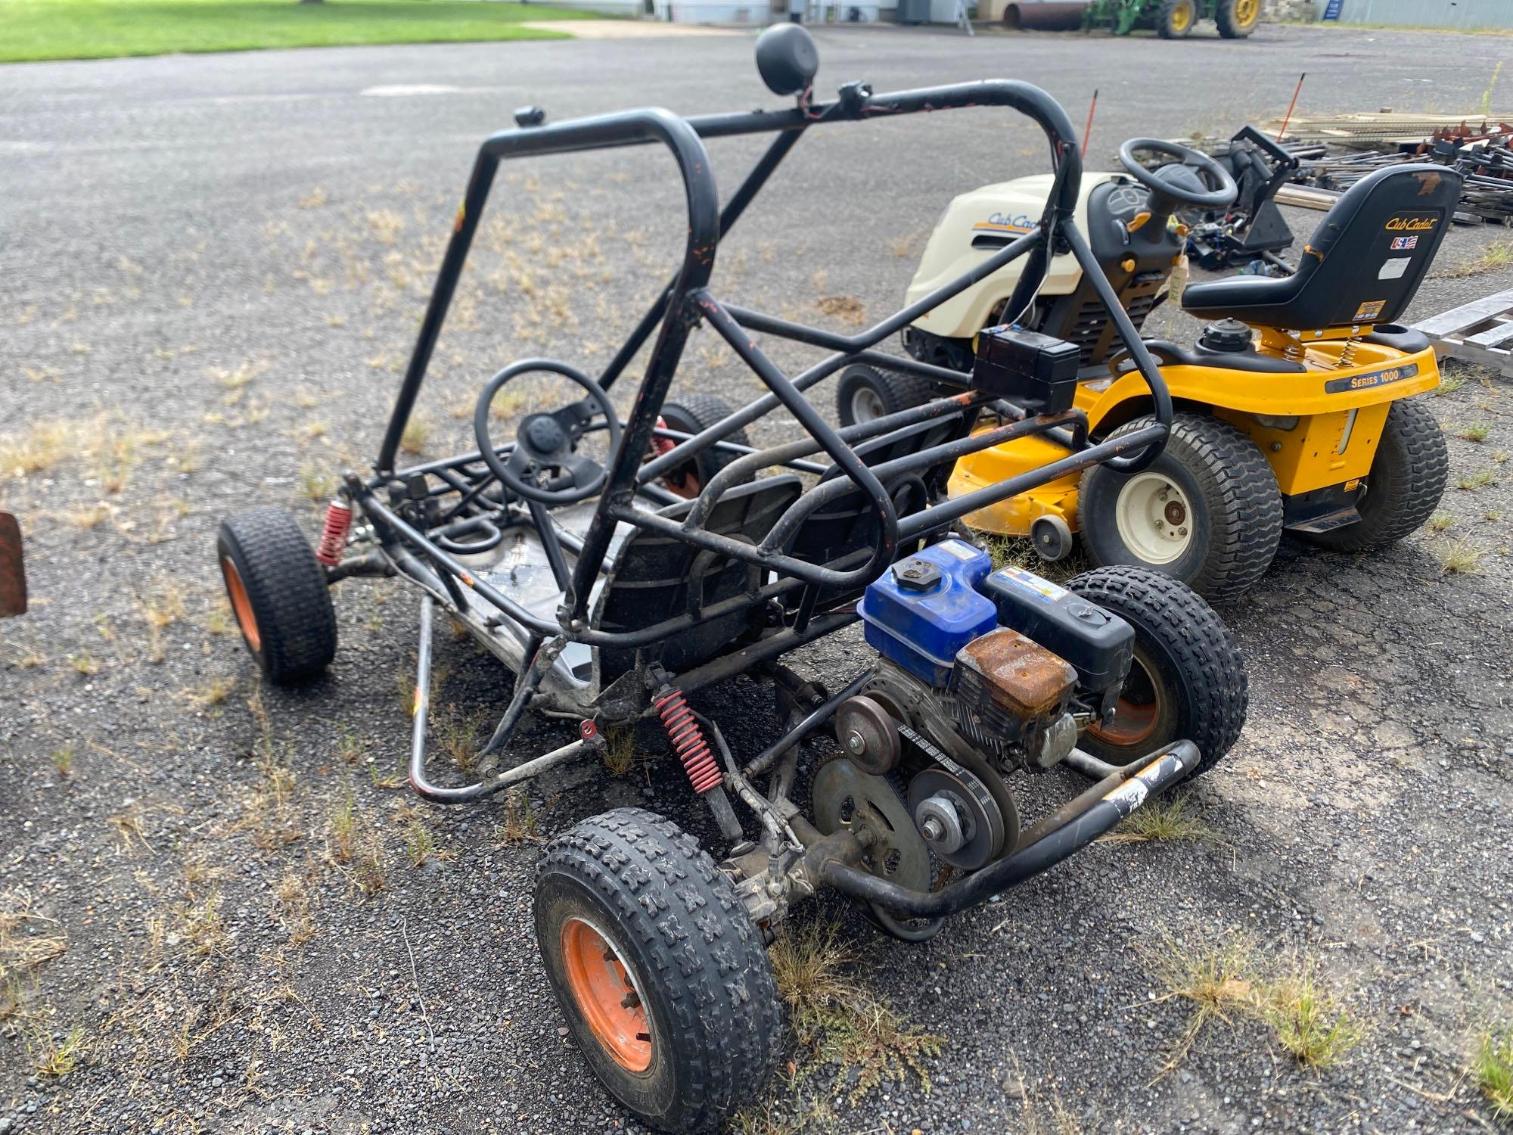 Image for 2 Seater Go Kart With Newer Motor, Appears to be 6.5HP 